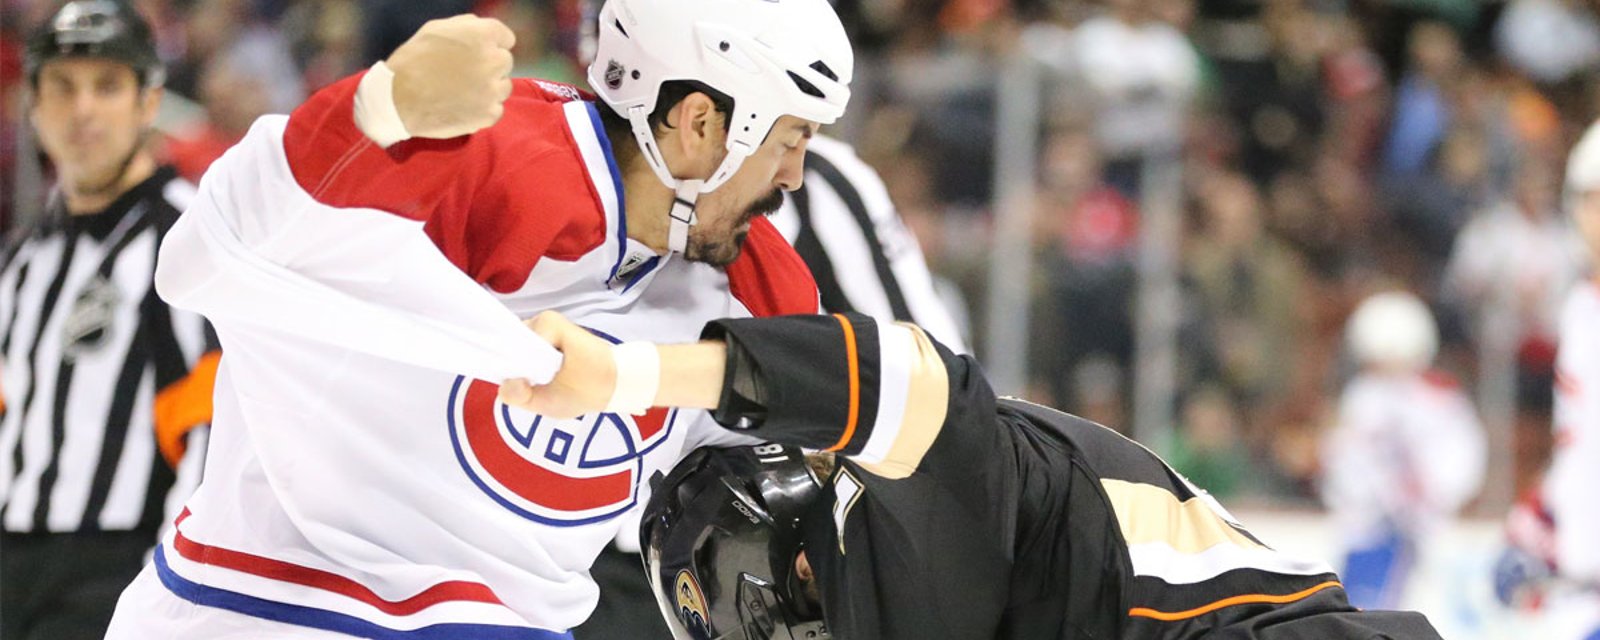 Your call: Does fighting still have a place in today’s NHL?